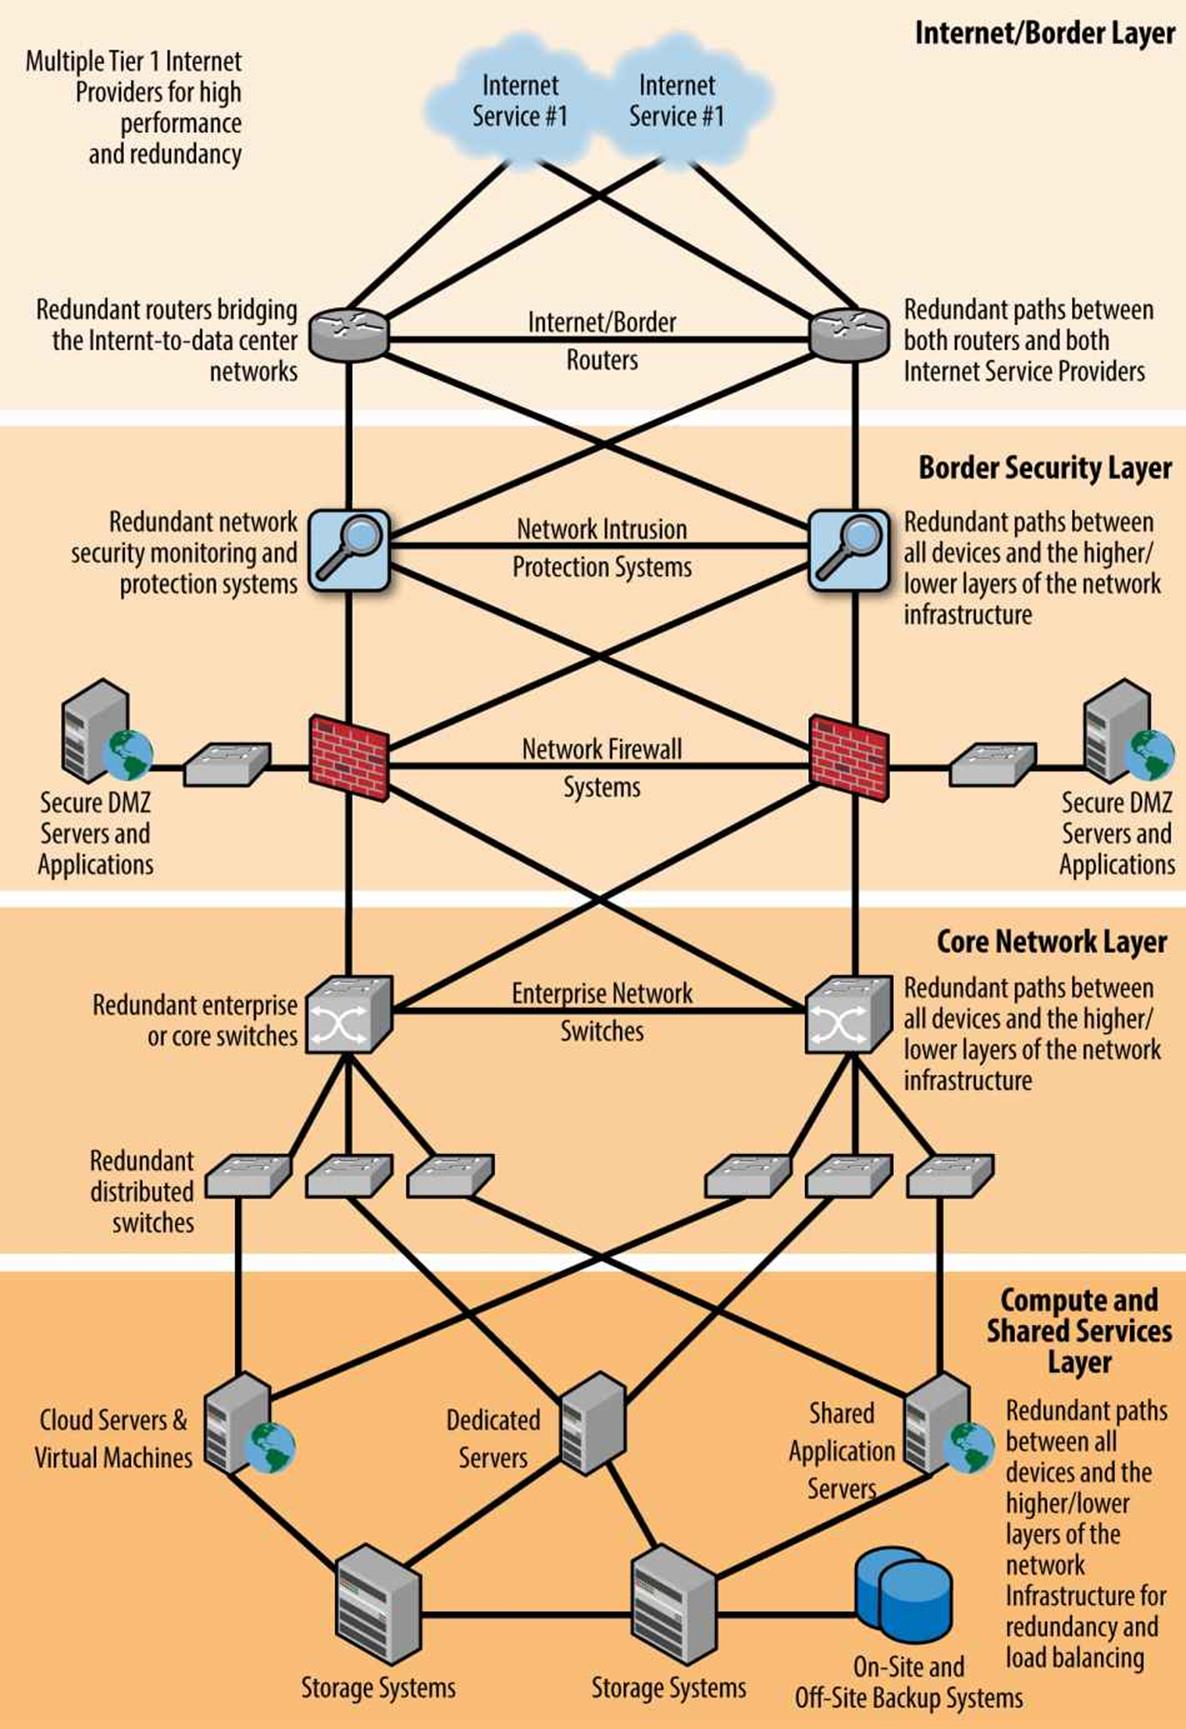 Network Infrastructure Layers